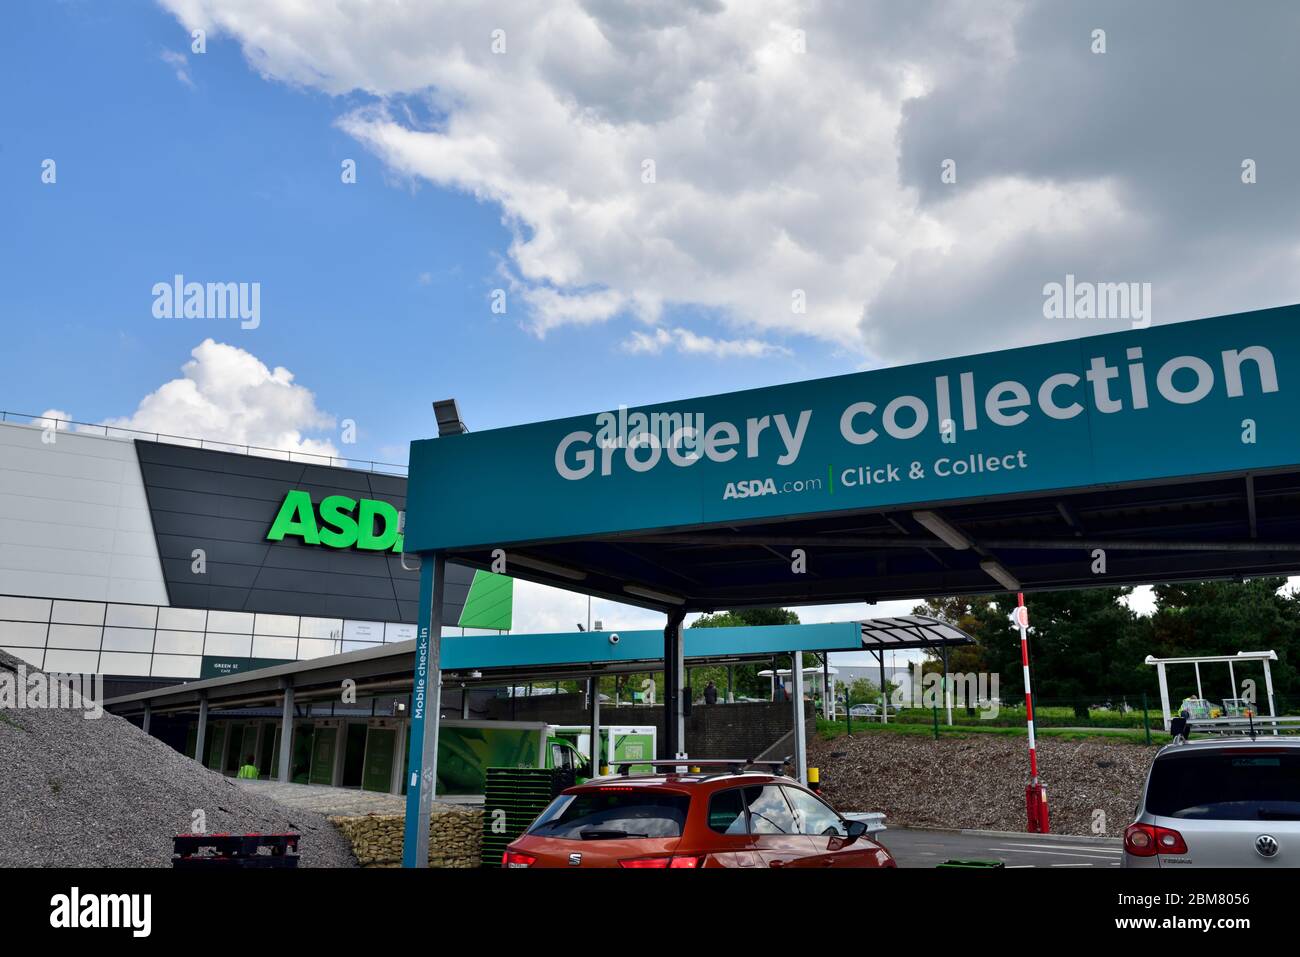 ASDA drive through exterior click and collect grocery collection point, Bristol, UK Stock Photo